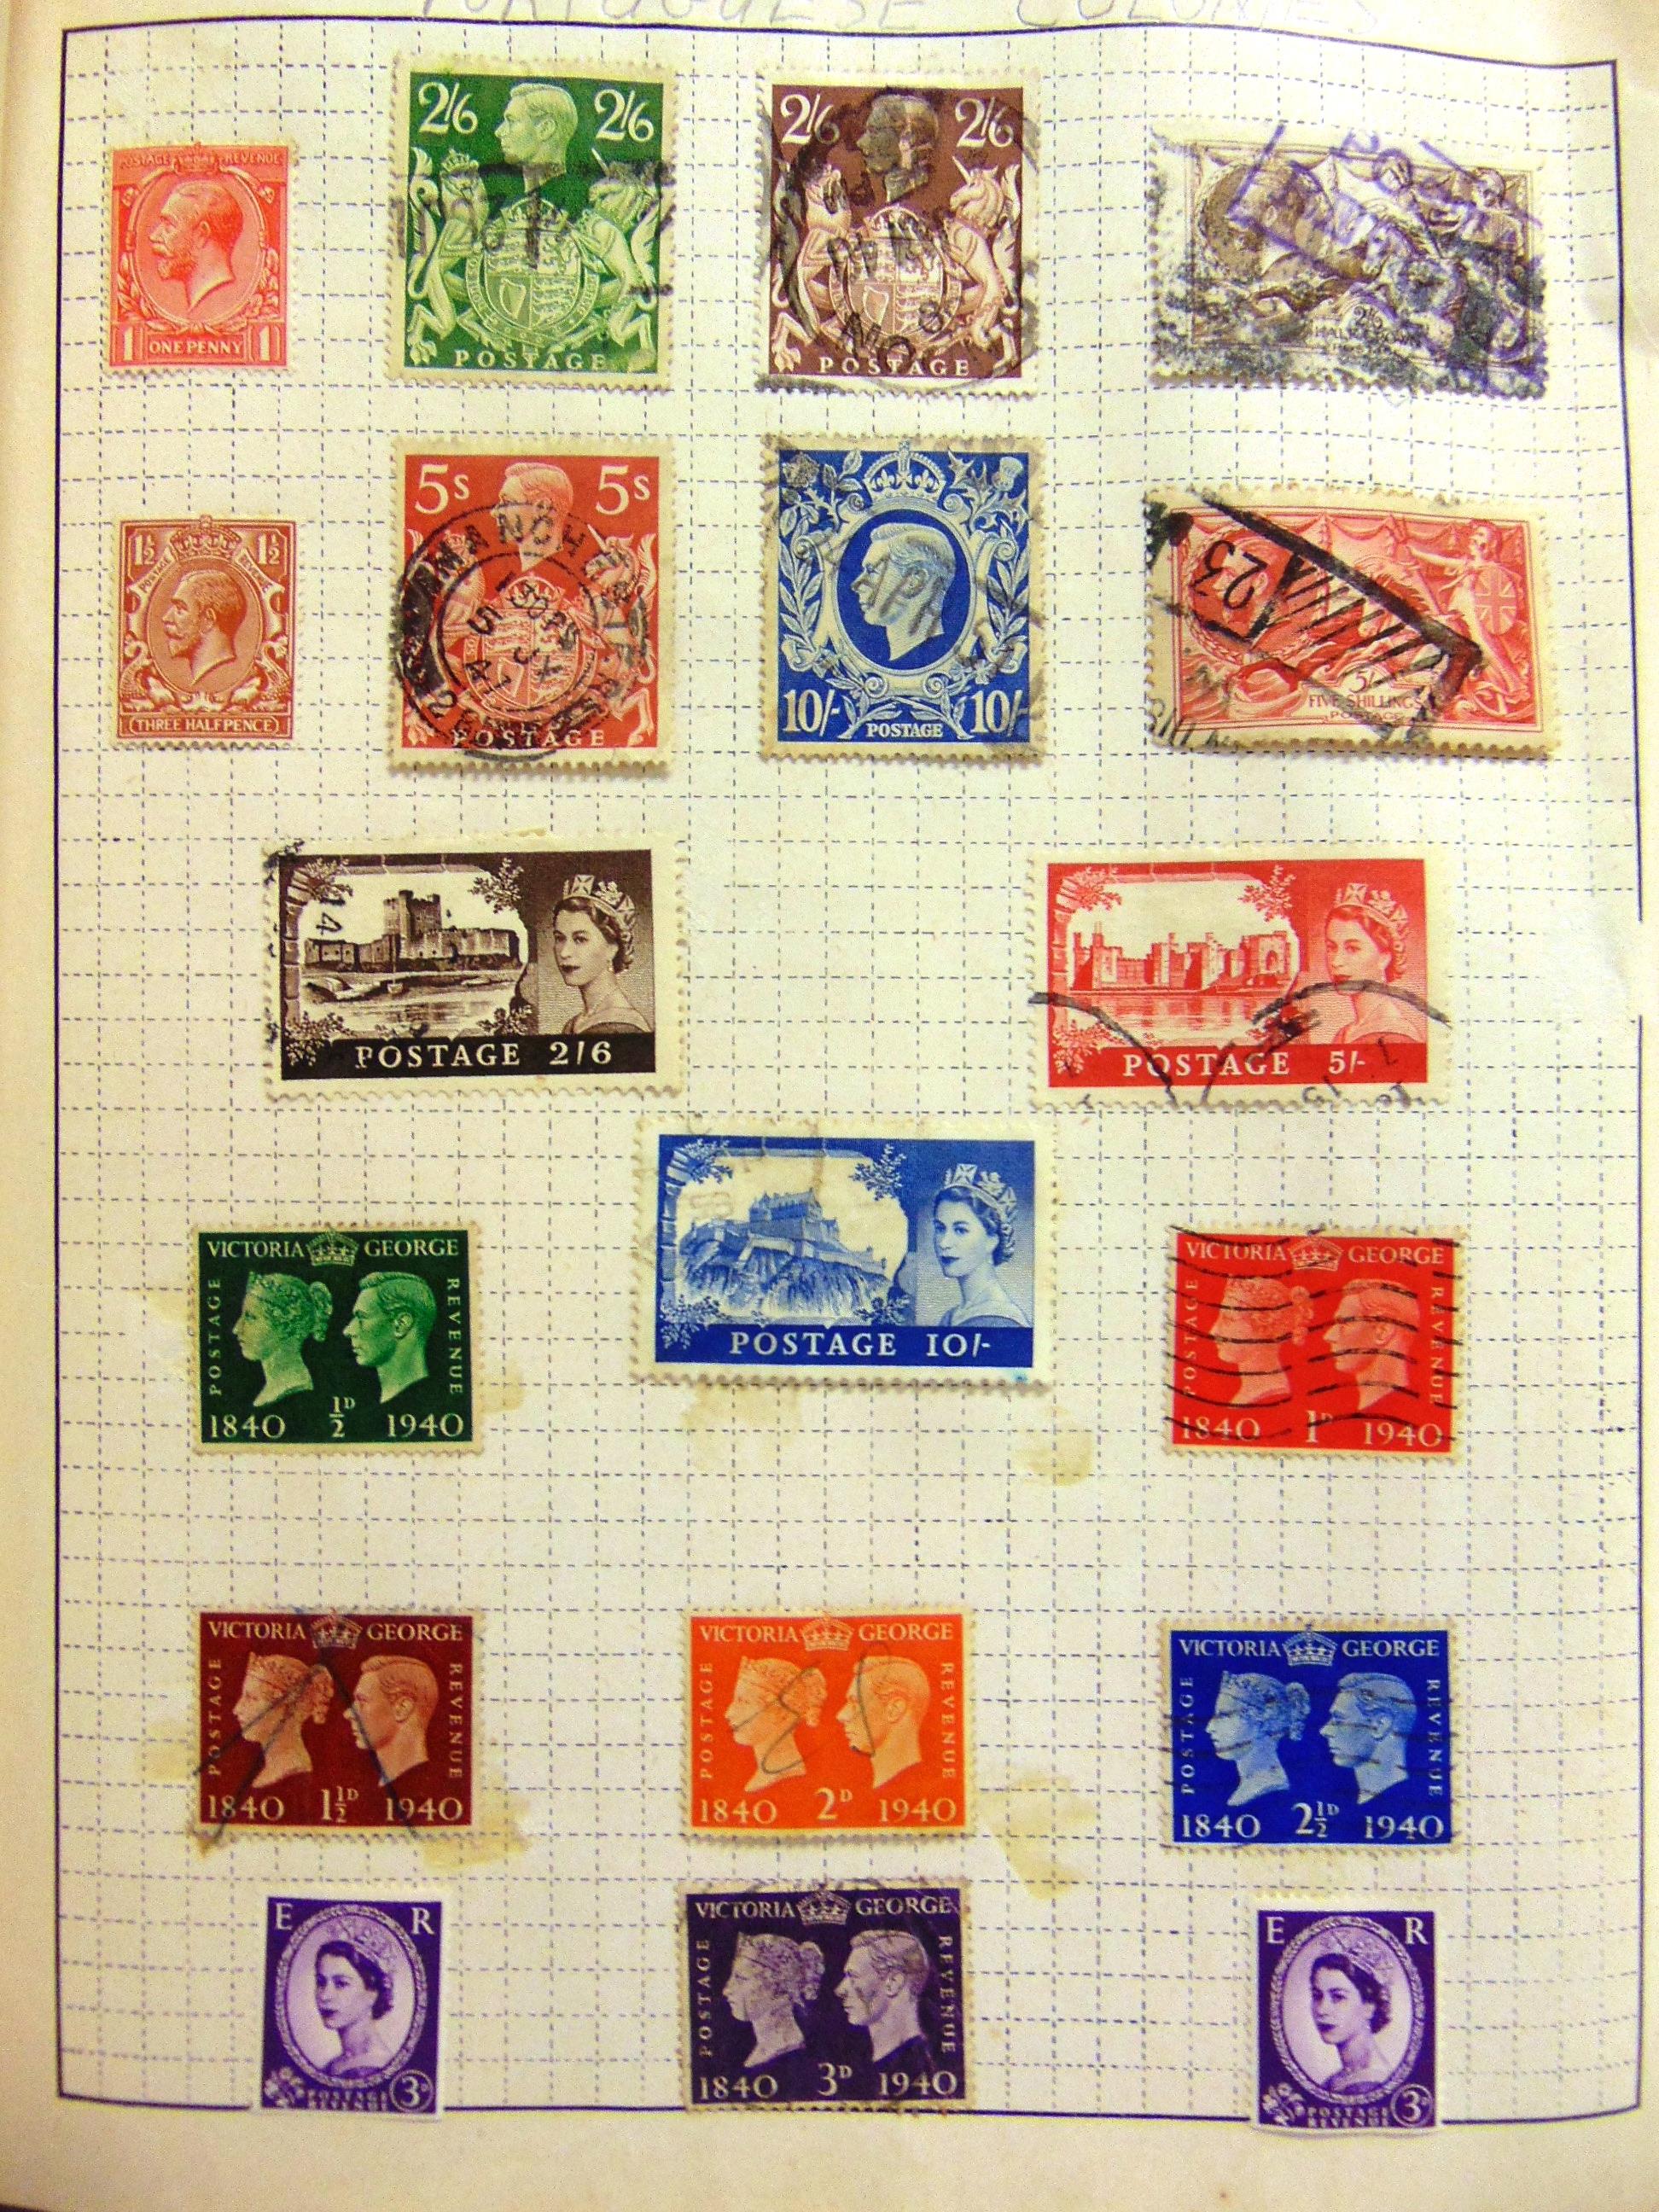 STAMPS - AN ALL-WORLD COLLECTION including Great Britain and British Commonwealth, mint and used;